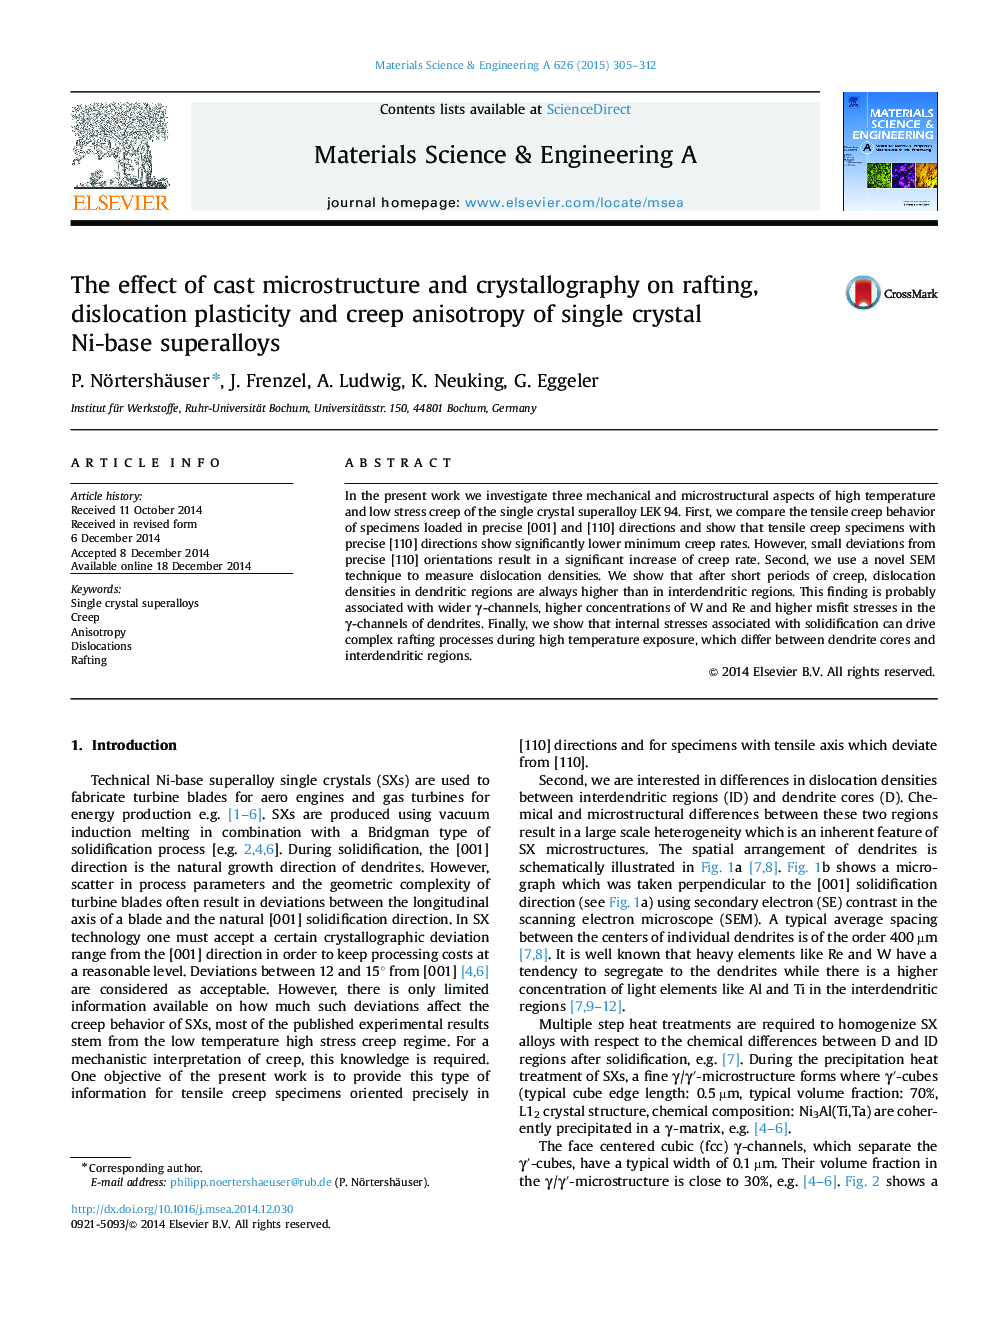 The effect of cast microstructure and crystallography on rafting, dislocation plasticity and creep anisotropy of single crystal Ni-base superalloys